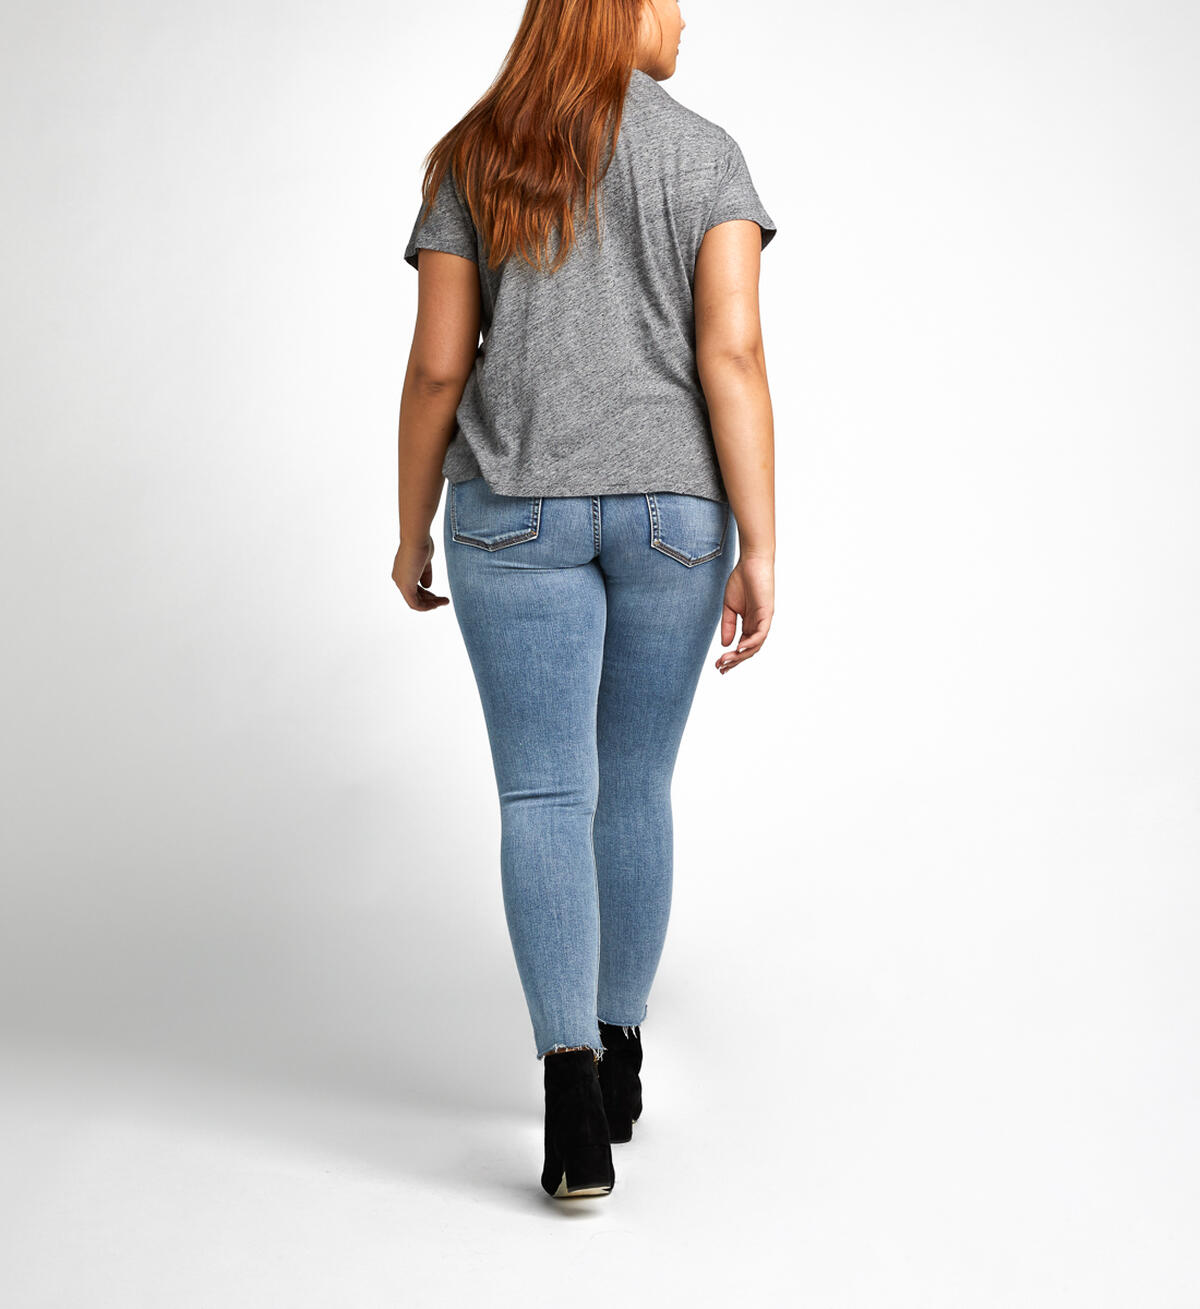 Aiko Ankle Skinny Maternity Jeans, , hi-res image number 2